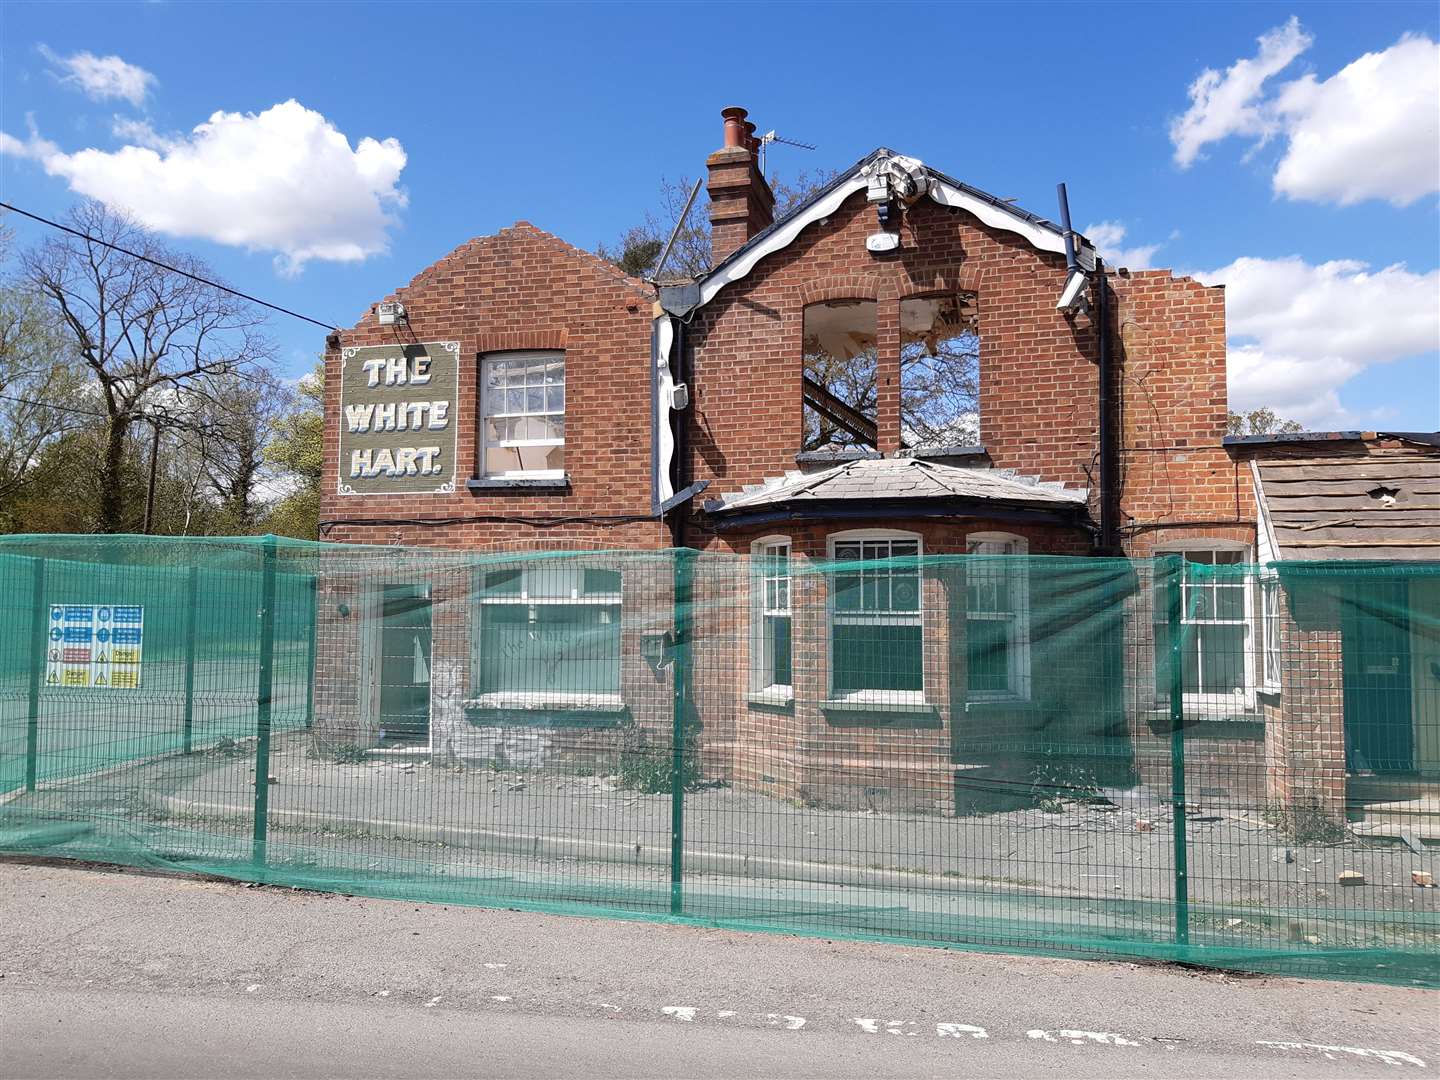 The White Hart in Claygate is being demolished